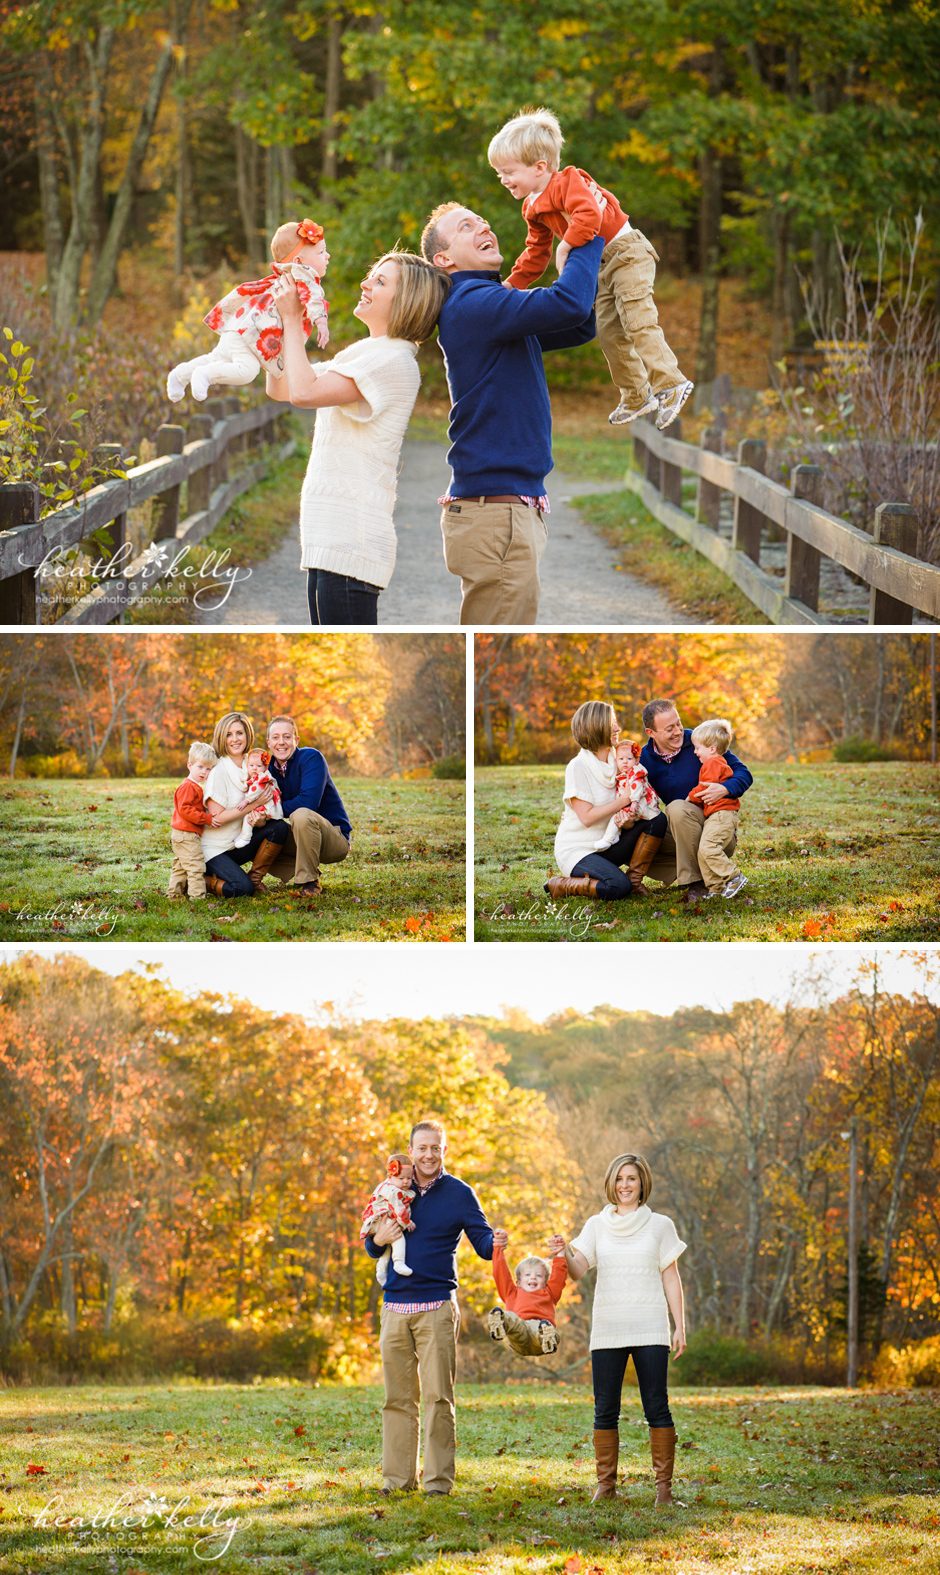 southford falls - brookfield family photographer - southbury family photographer - ct family photography - heather kelly photography